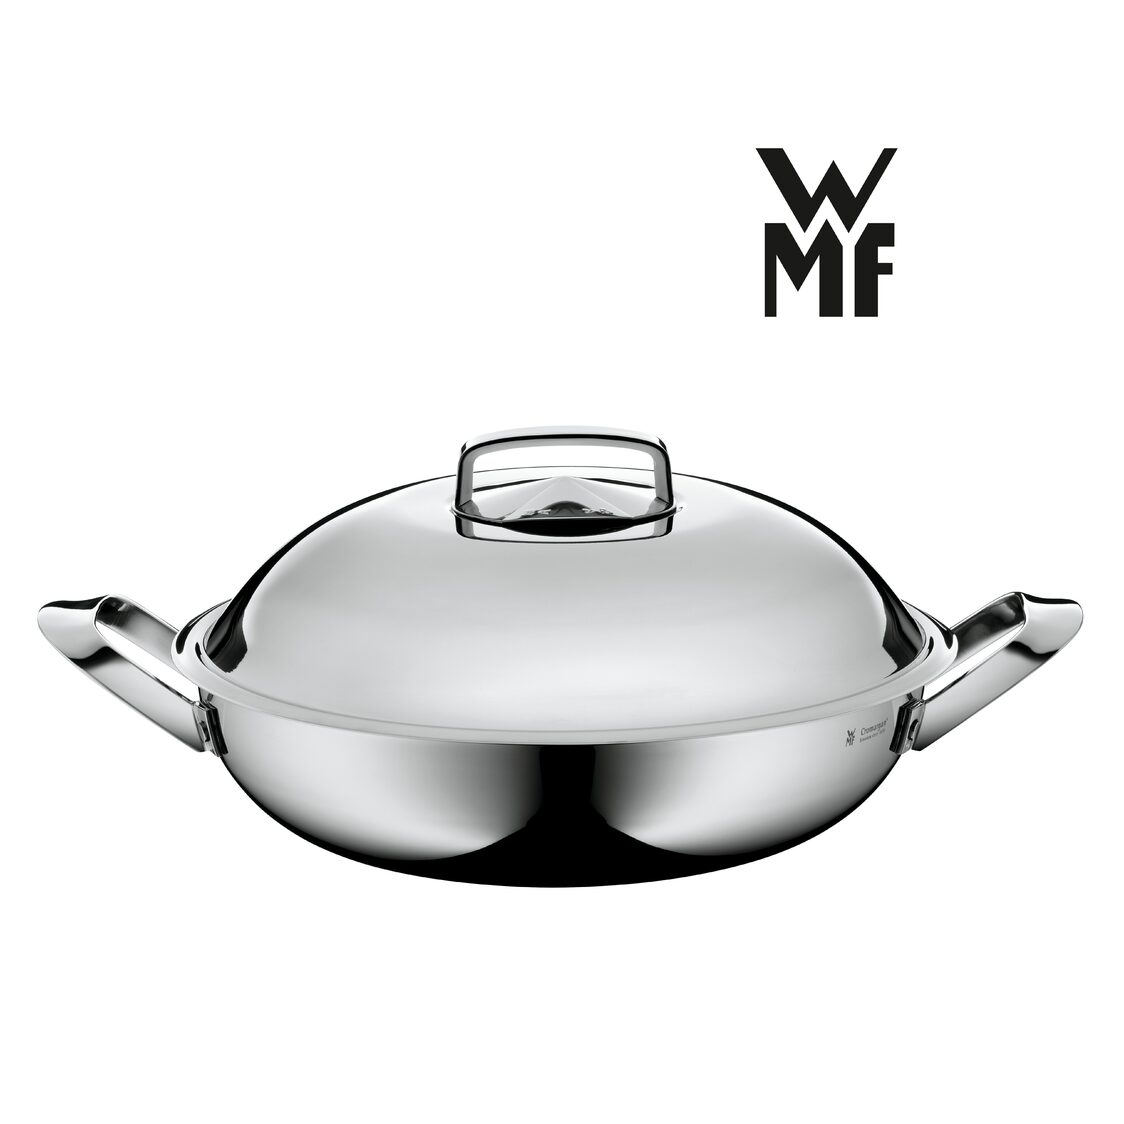 Deep Chinese Wok 32cm with Lid 2 side handles